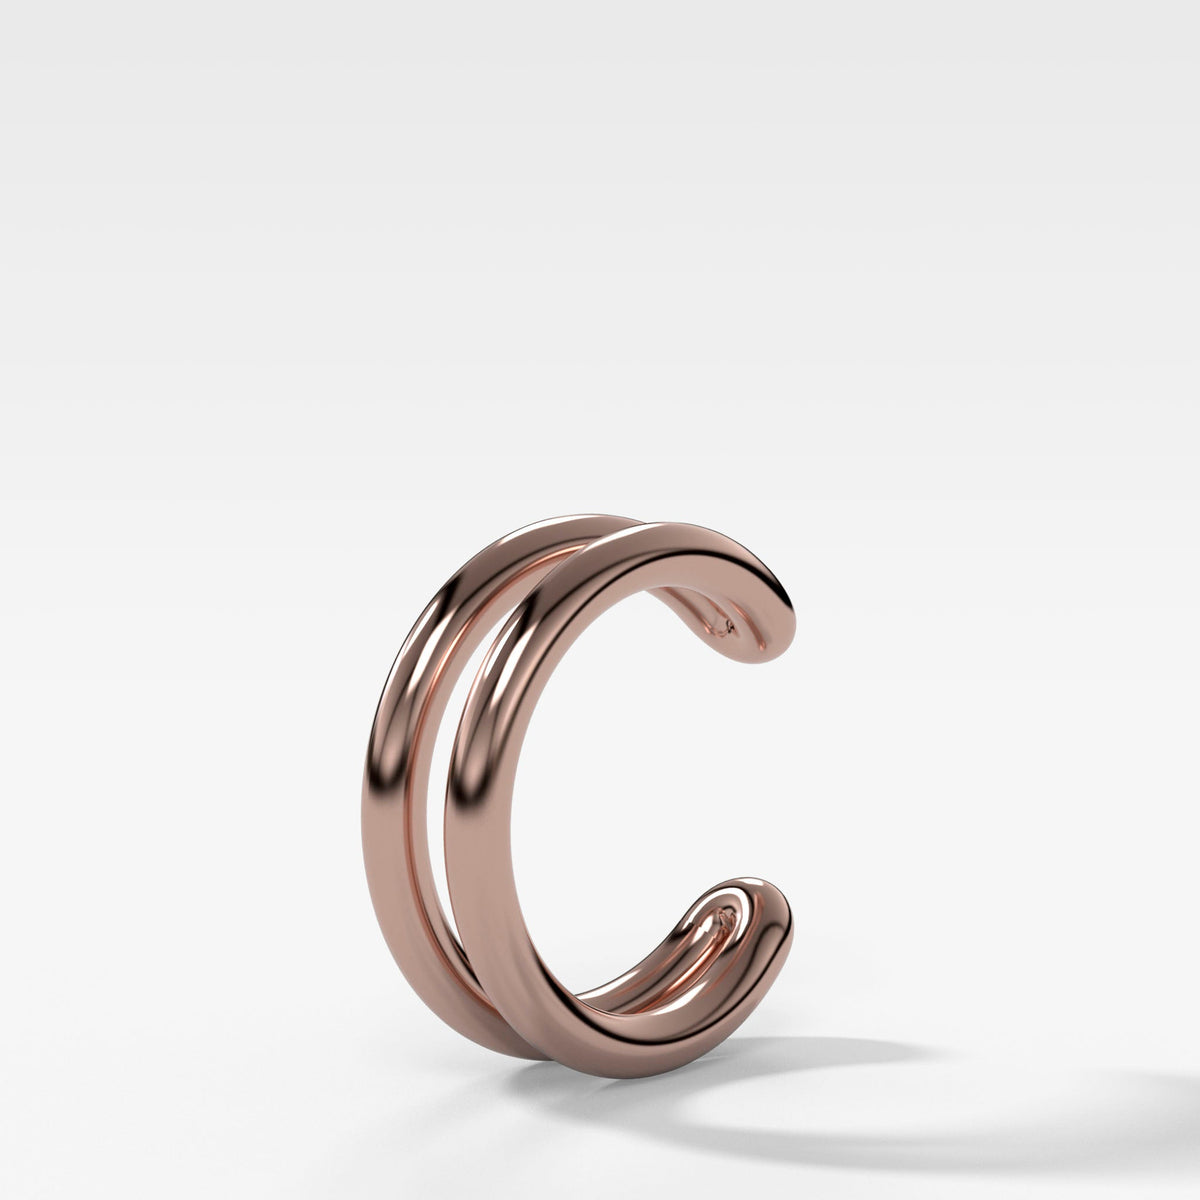 Negative Space Ear Cuff Single by Good Stone available in Rose Gold